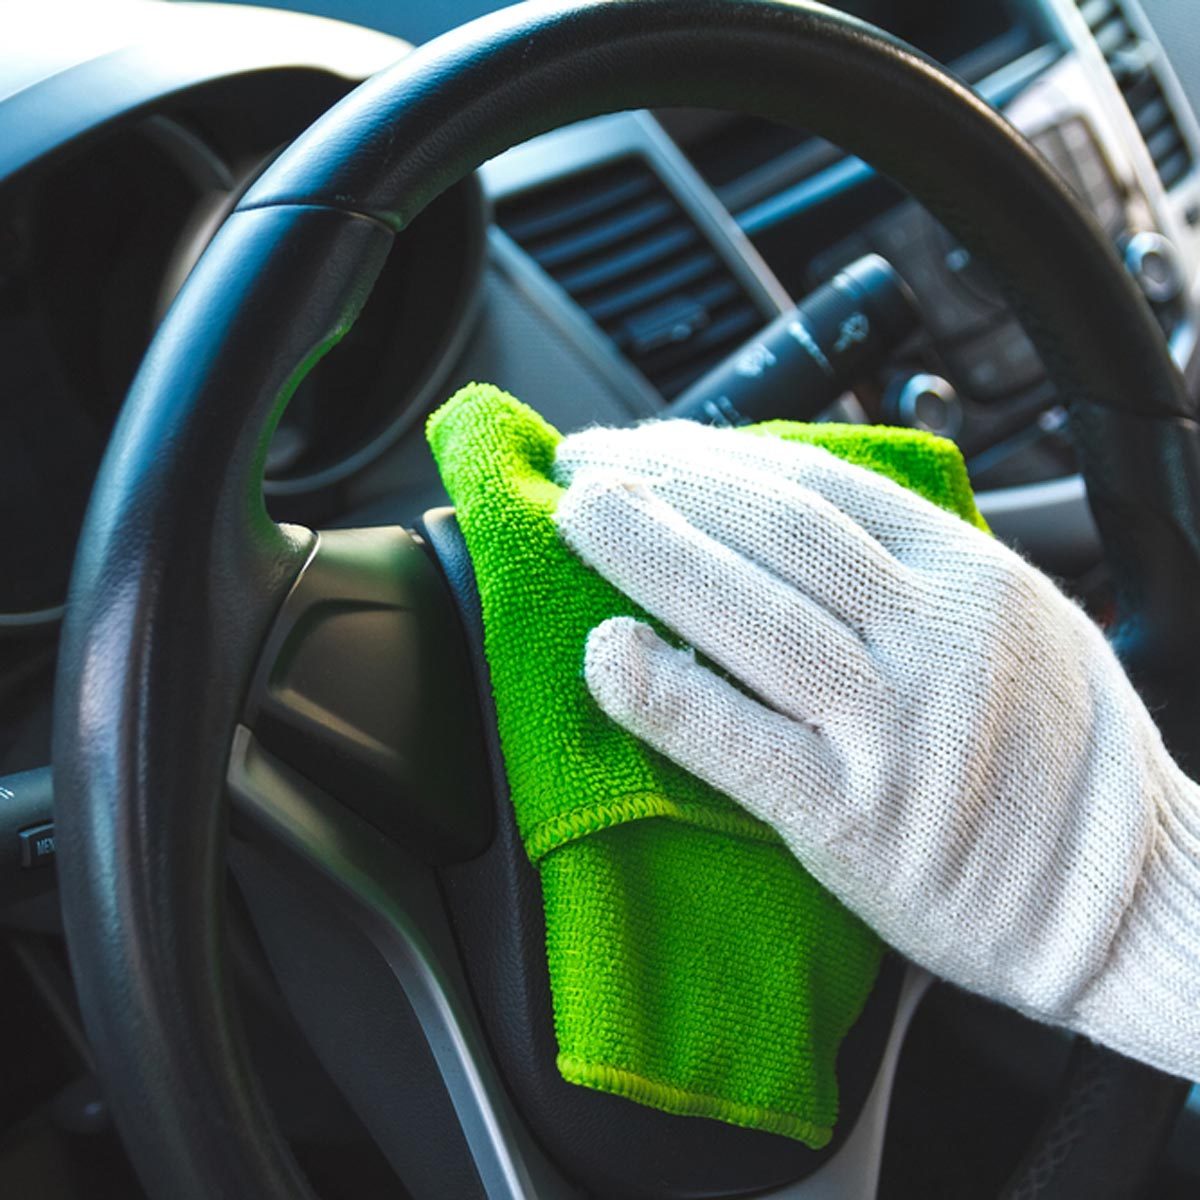 Car Detailing Tricks That Will Help You Make The Job Easier - AllDayChic